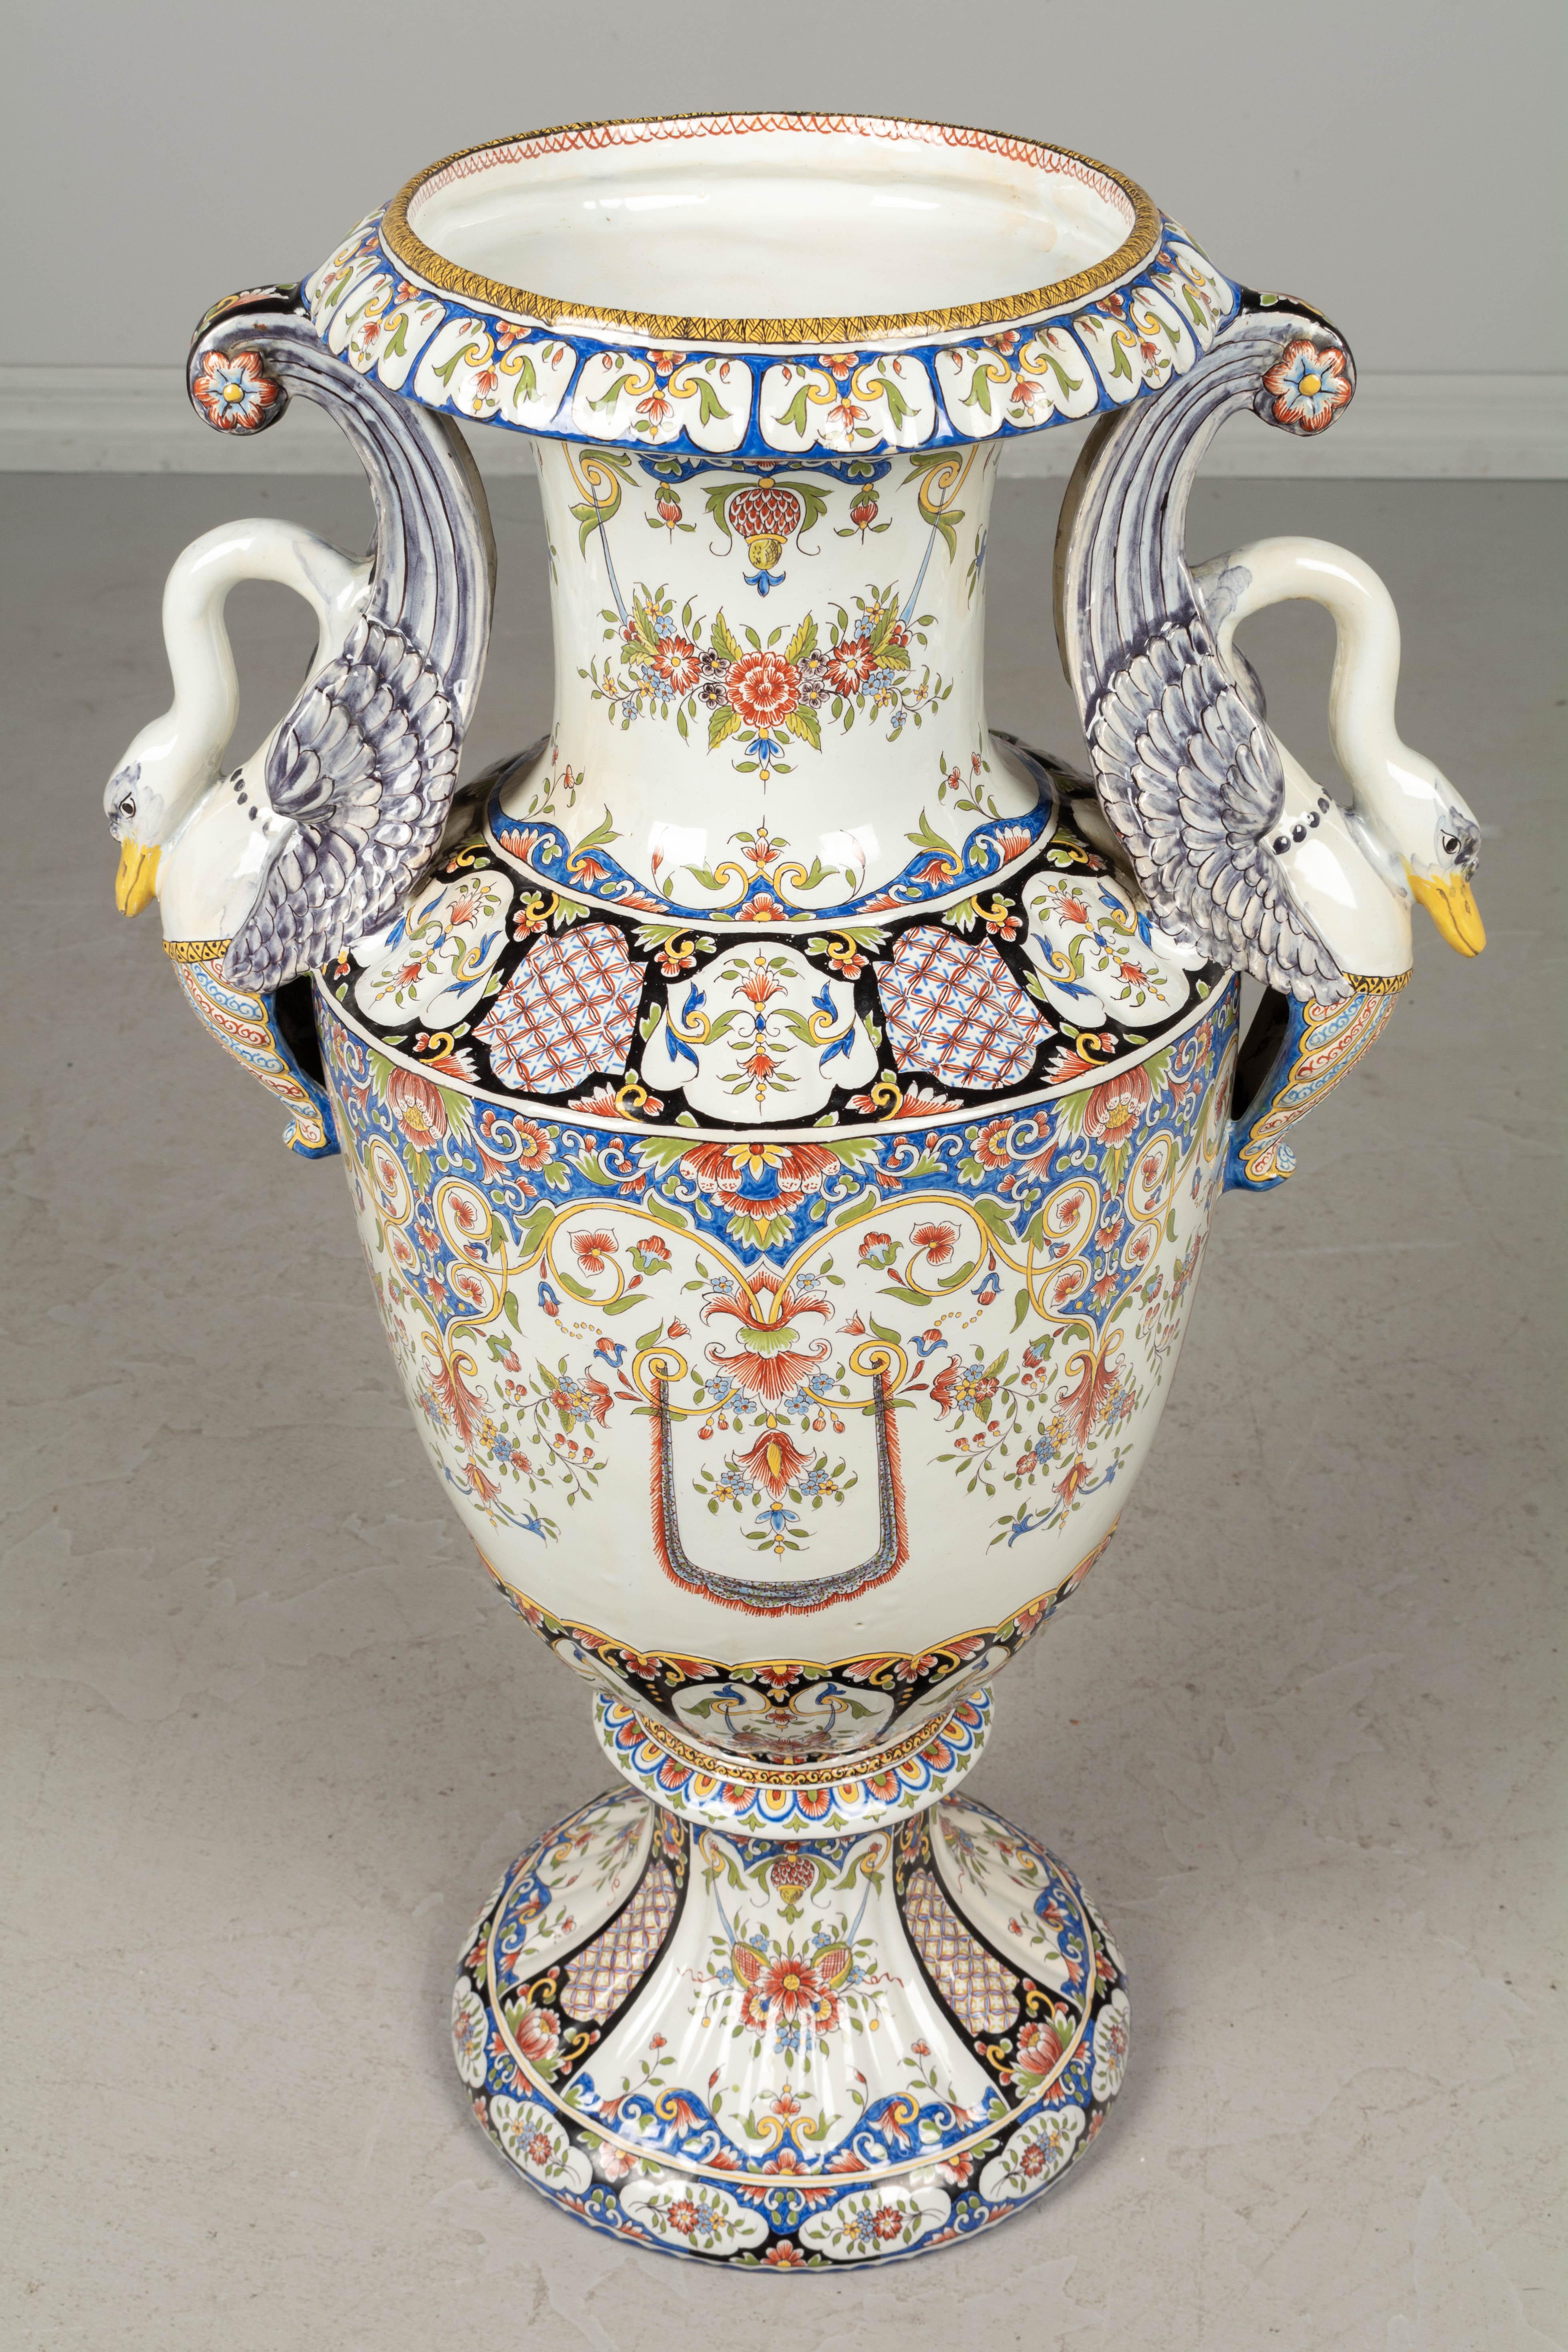 19th Century French Desvres Faience Urns, a Pair For Sale 10